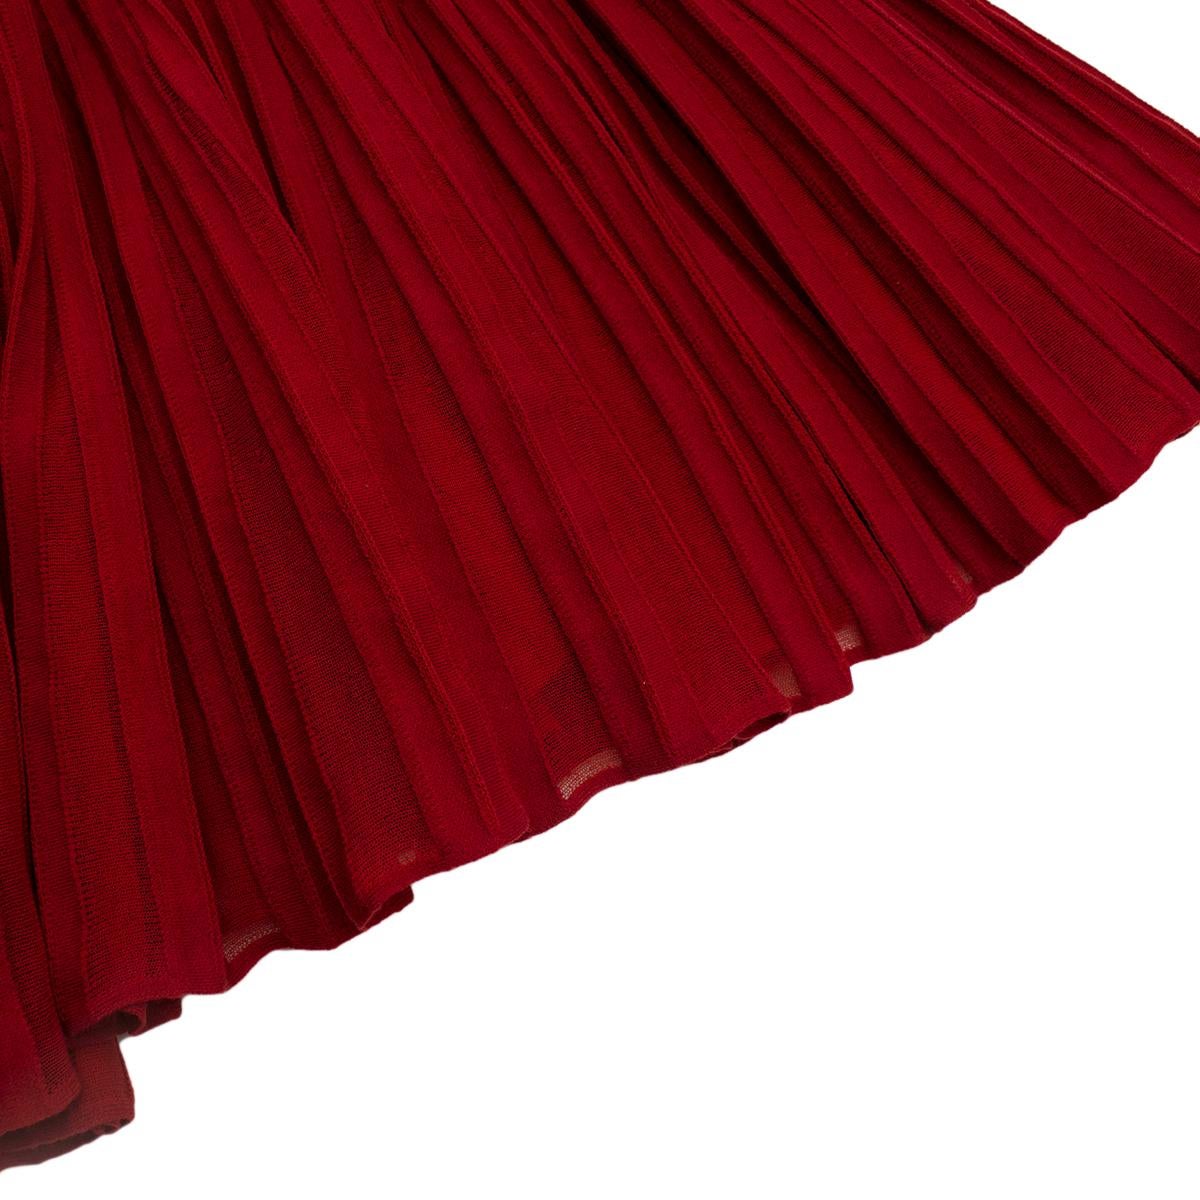 Alaia Red Stretch Knit Pleated Sleeveless Dress - Us size 10 2